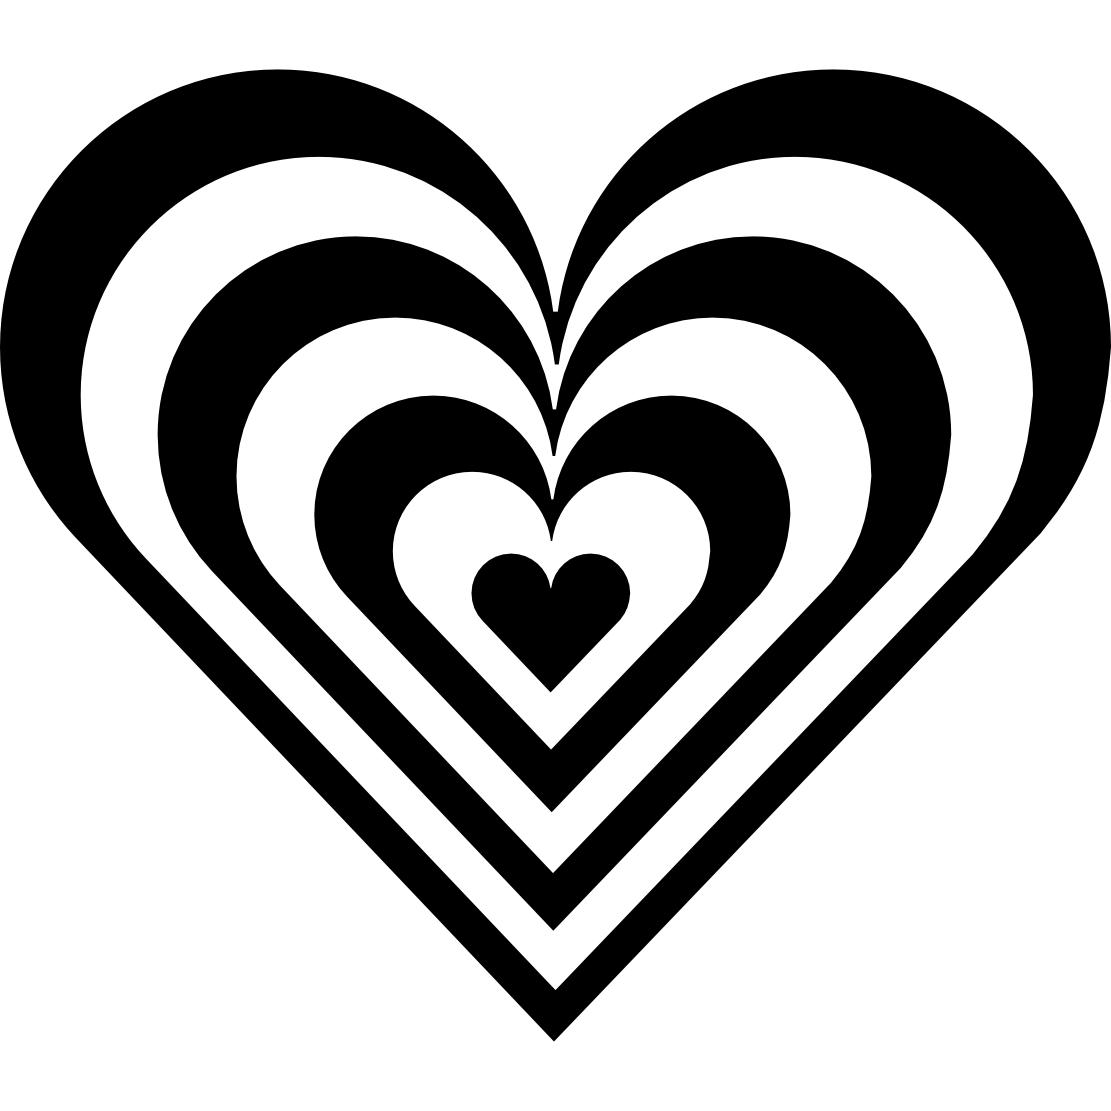 Heart Clipart Black And White - awesome clipart - valentine clipart, sacred heart of jesus clip art, printable heart clipart, heart swirl clipart, heart clipart red, heart arrow clipart, hand with heart clipart, grinch heart clipart, free heart clipart, free heart clip art, free clip art heart outline, free clip art heart black and white, double heart clip art, clip art+heart, clip art valentine hearts, clip art hearts, clip art free heart, bleeding heart clipart, black and white heart scroll underline clip art, art-works for free